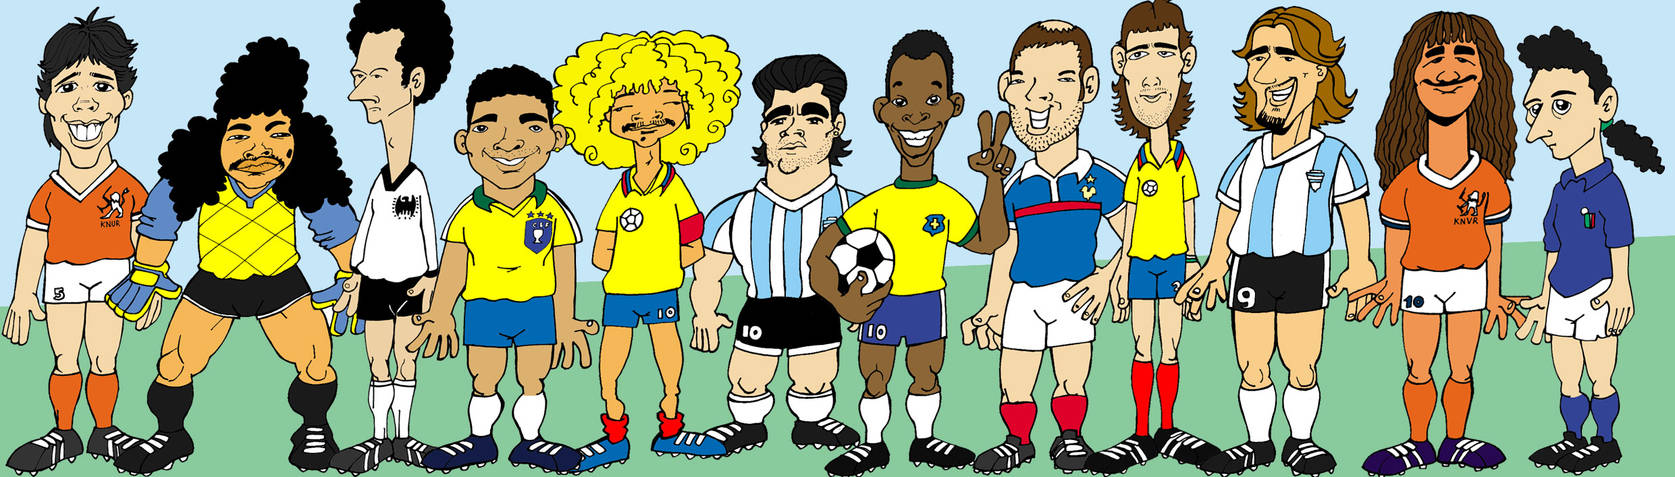 Famous soccer players by Cardoto on DeviantArt